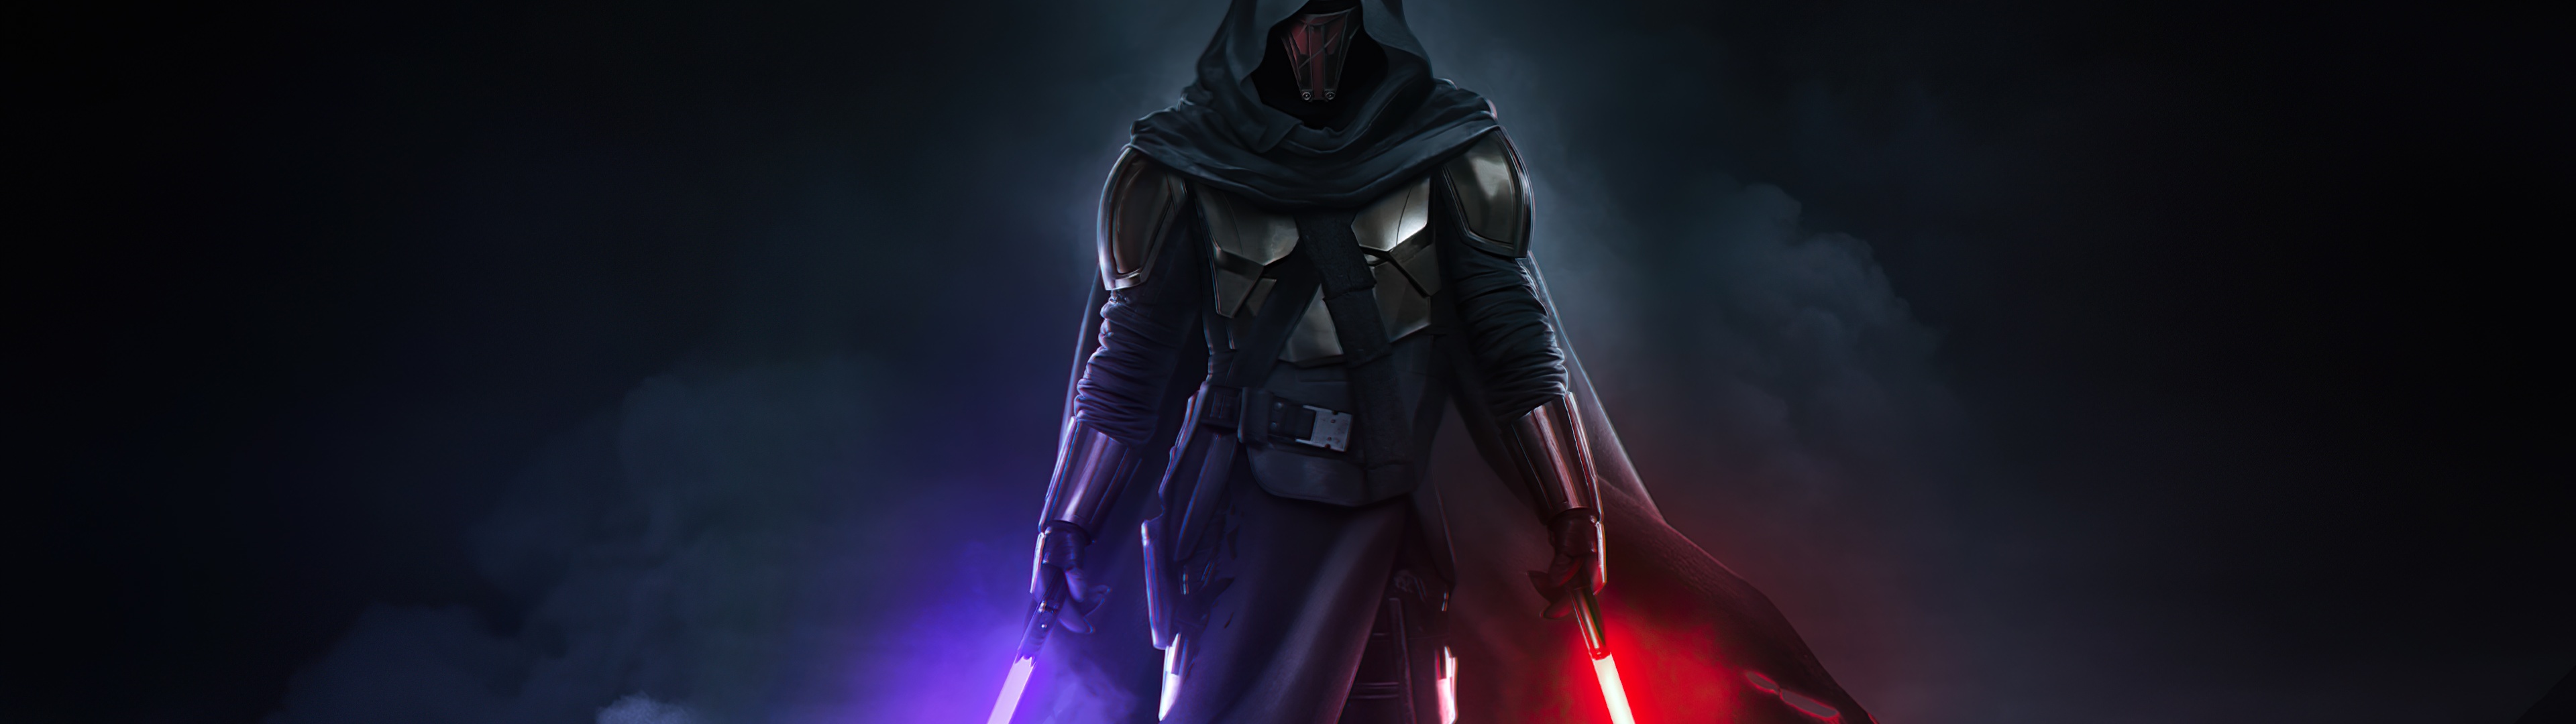 Star Wars Revenge of the Sith Iphone Wallpaper by ChrisBruh12 on DeviantArt